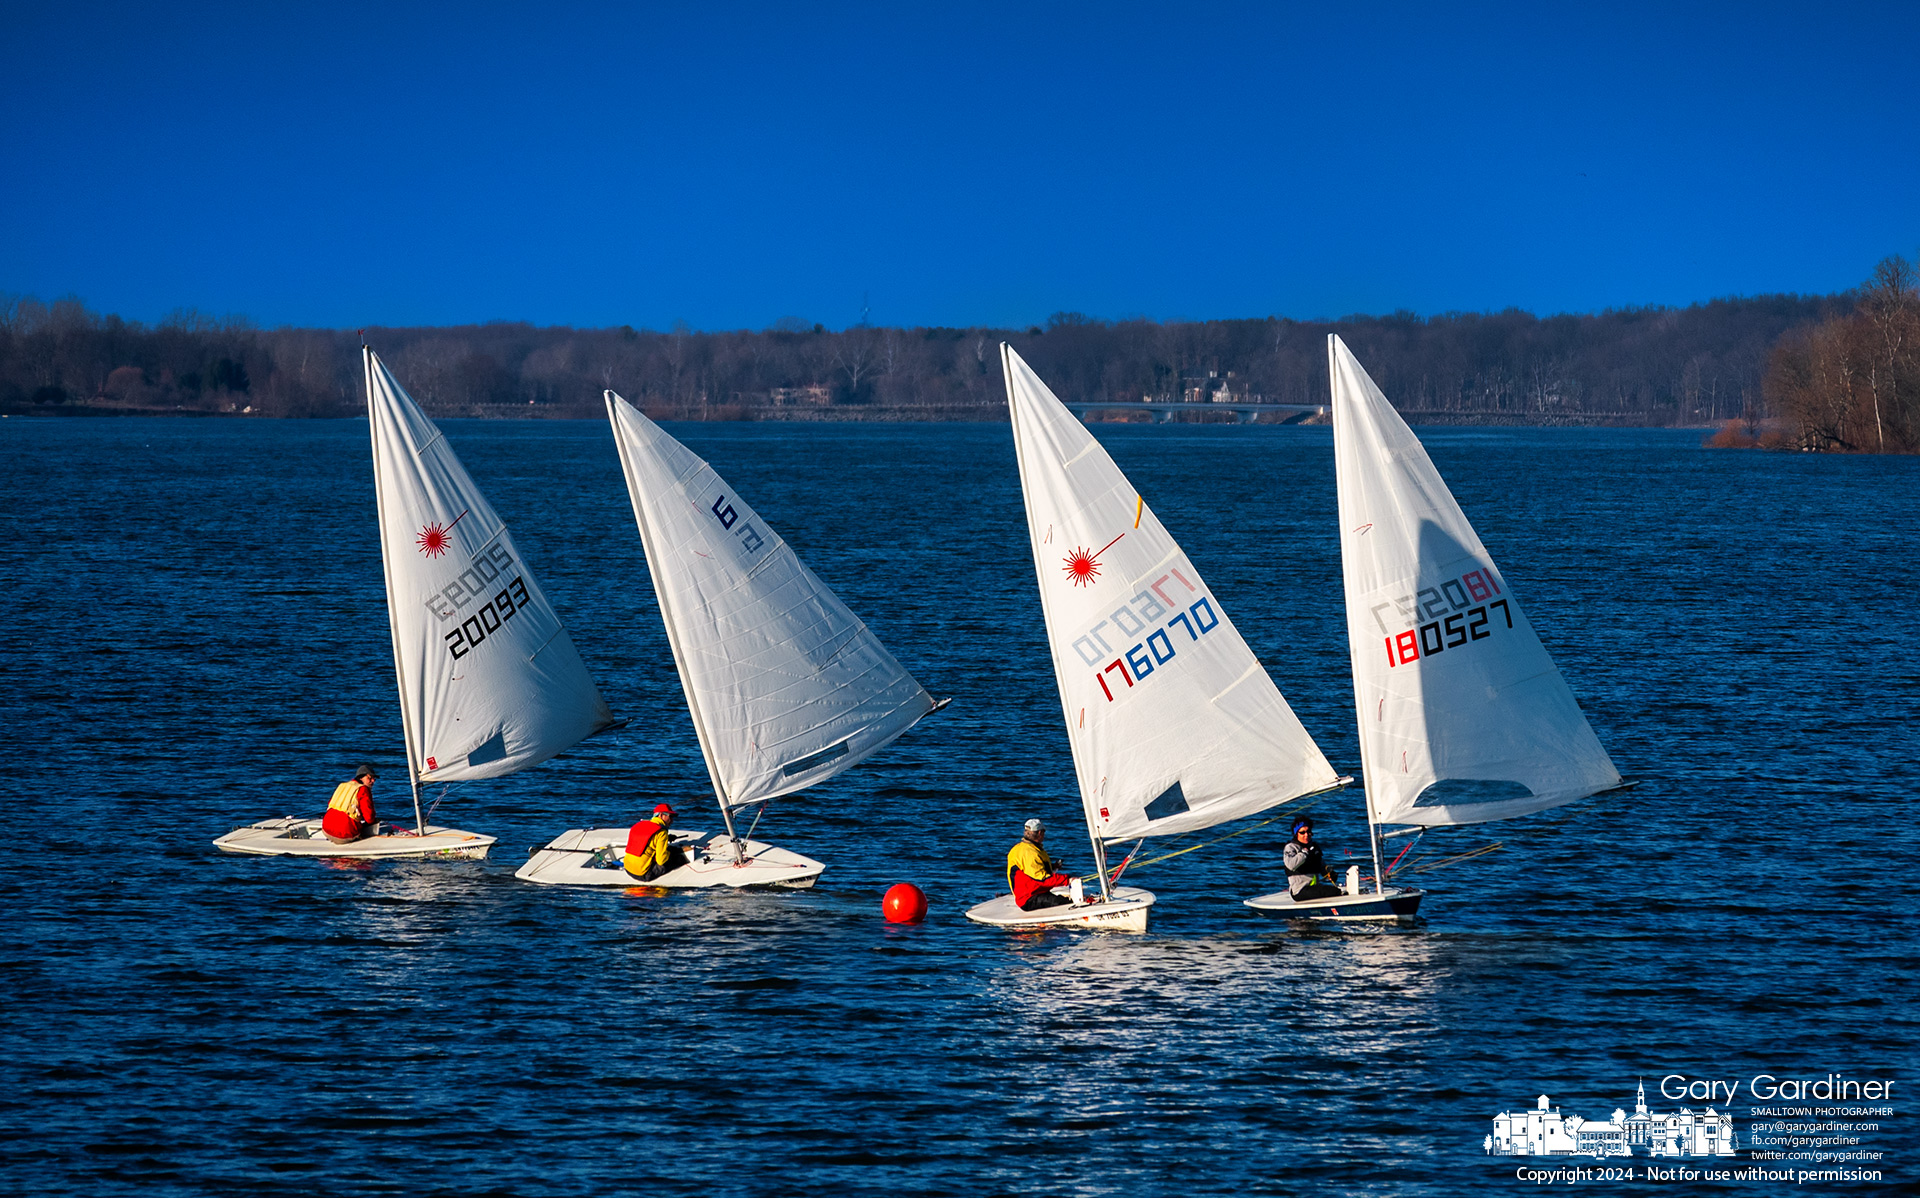 With the Red Bank bridge at the horizon and a minimum of four boats to race on a winter day, a quartet of sailors from the Hoover Sail Club pass the final buoy on the final race Sunday afternoon. My Final Photo for February 11, 2024.